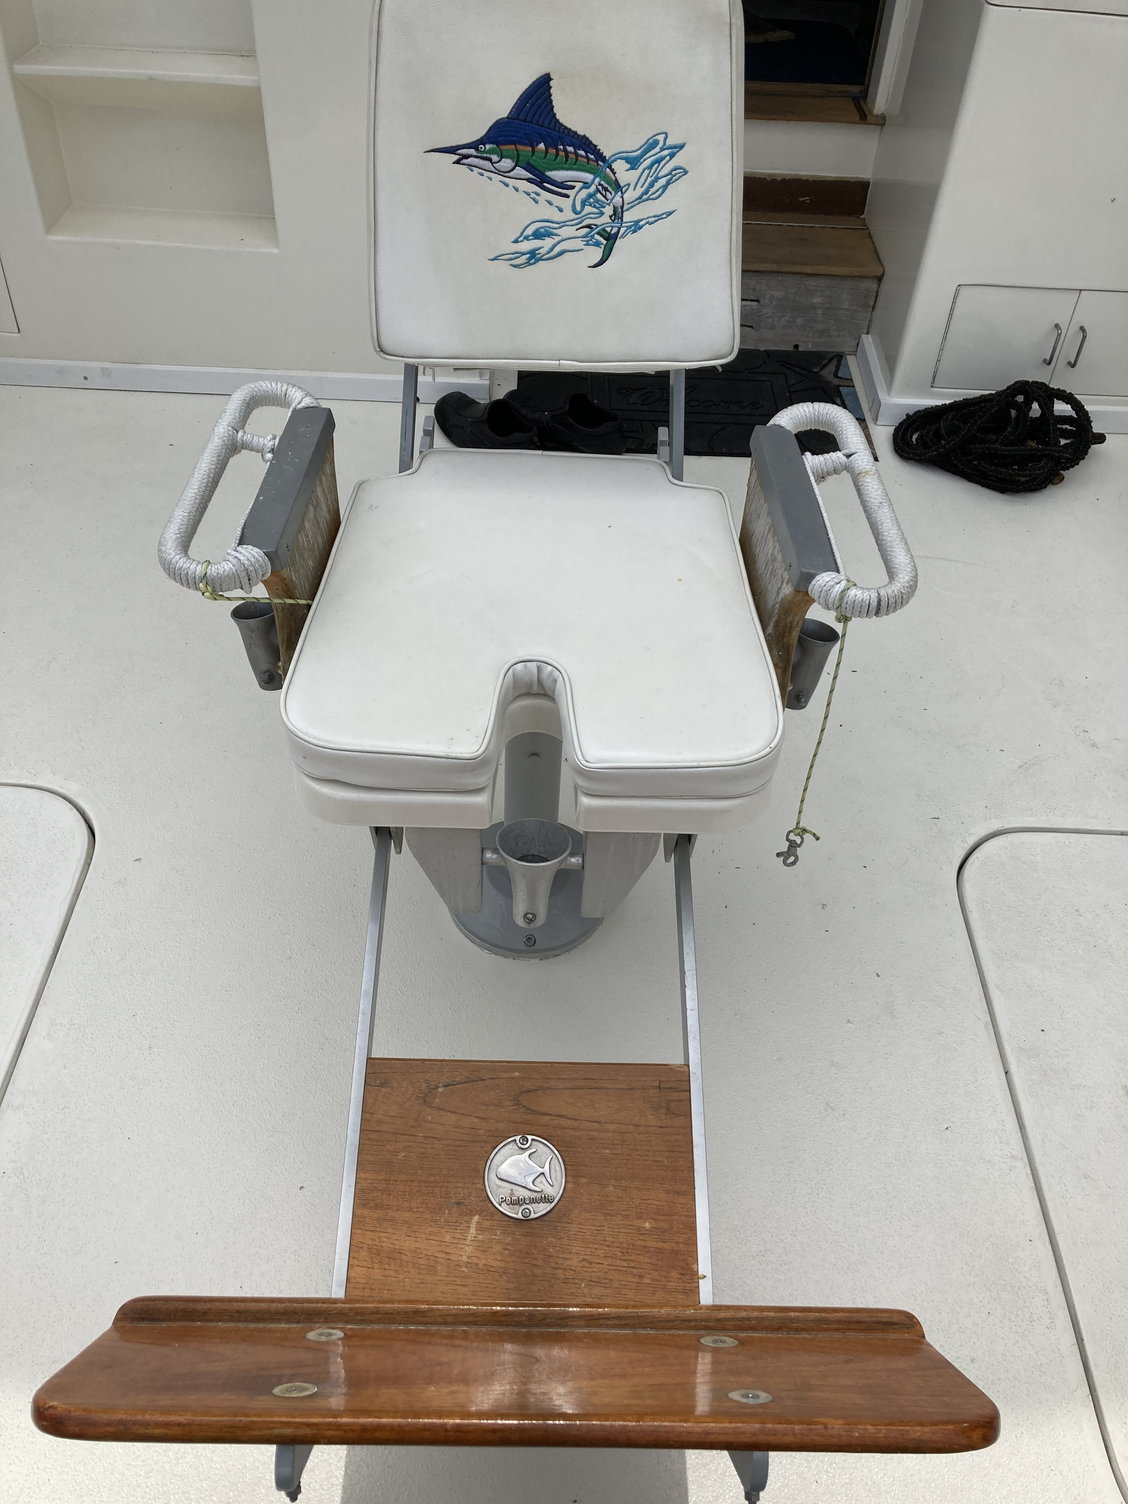 Sell - Pompanette Fighting Chair - The Hull Truth - Boating and